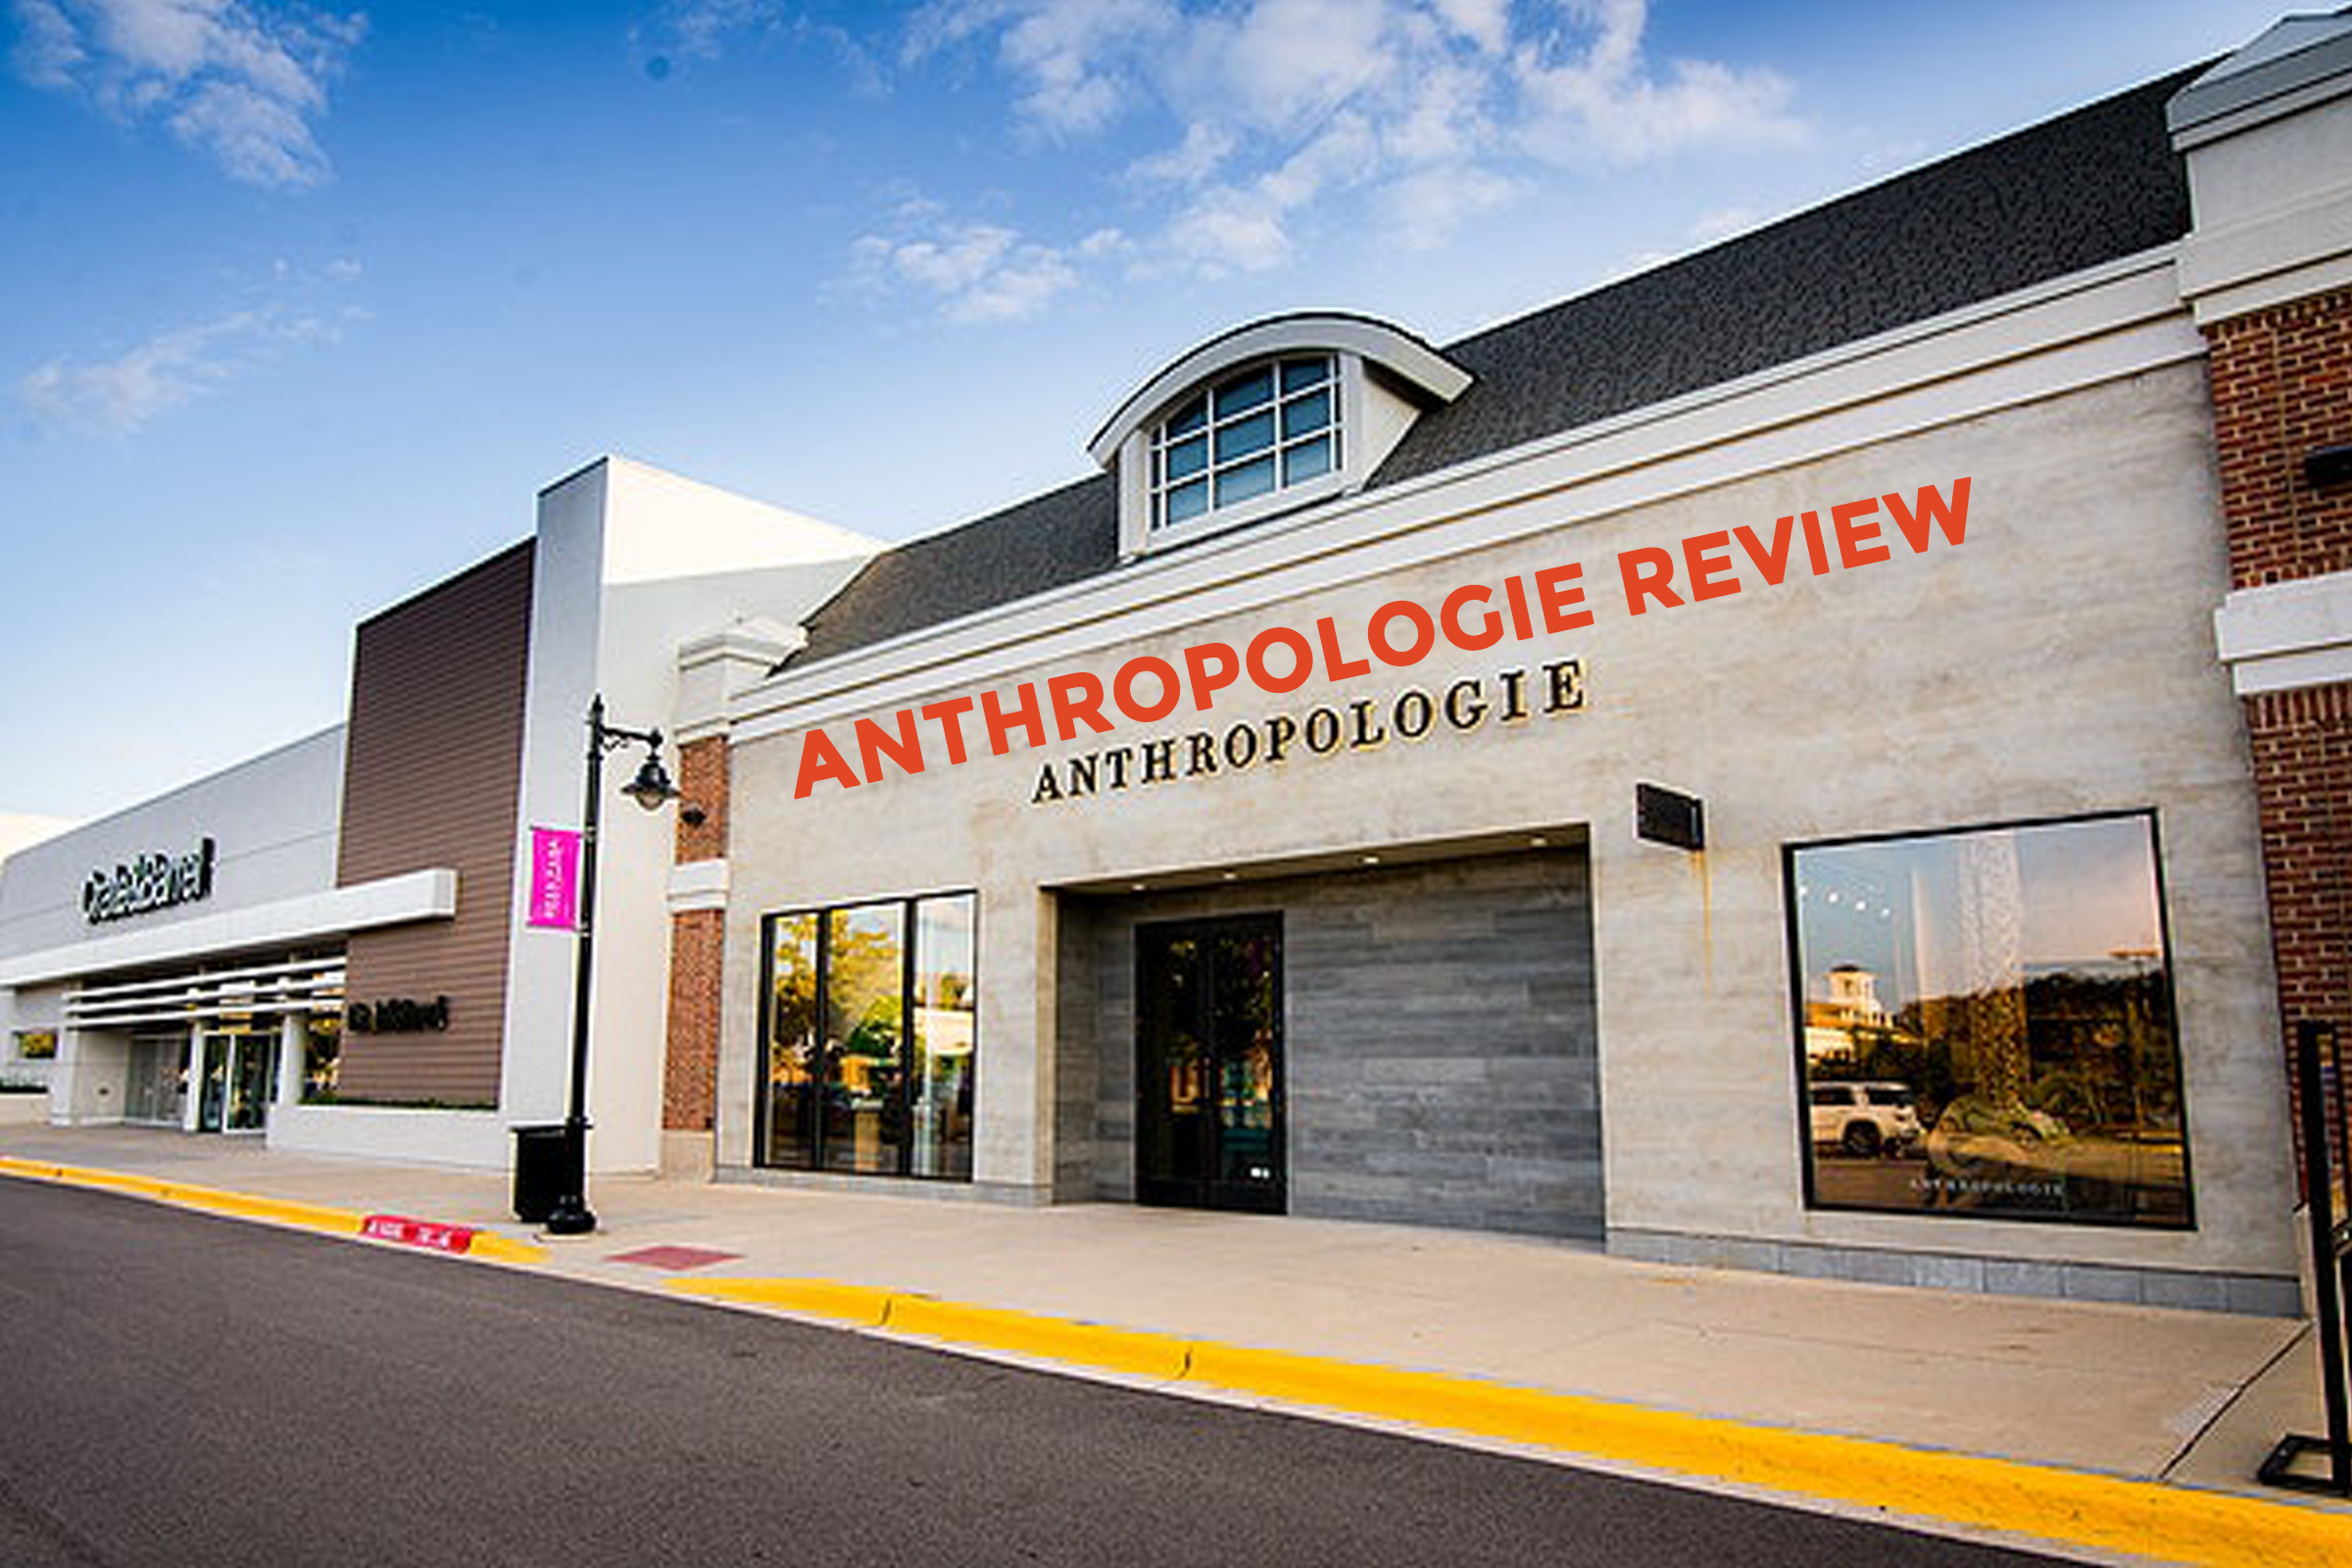 Anthropologie Review